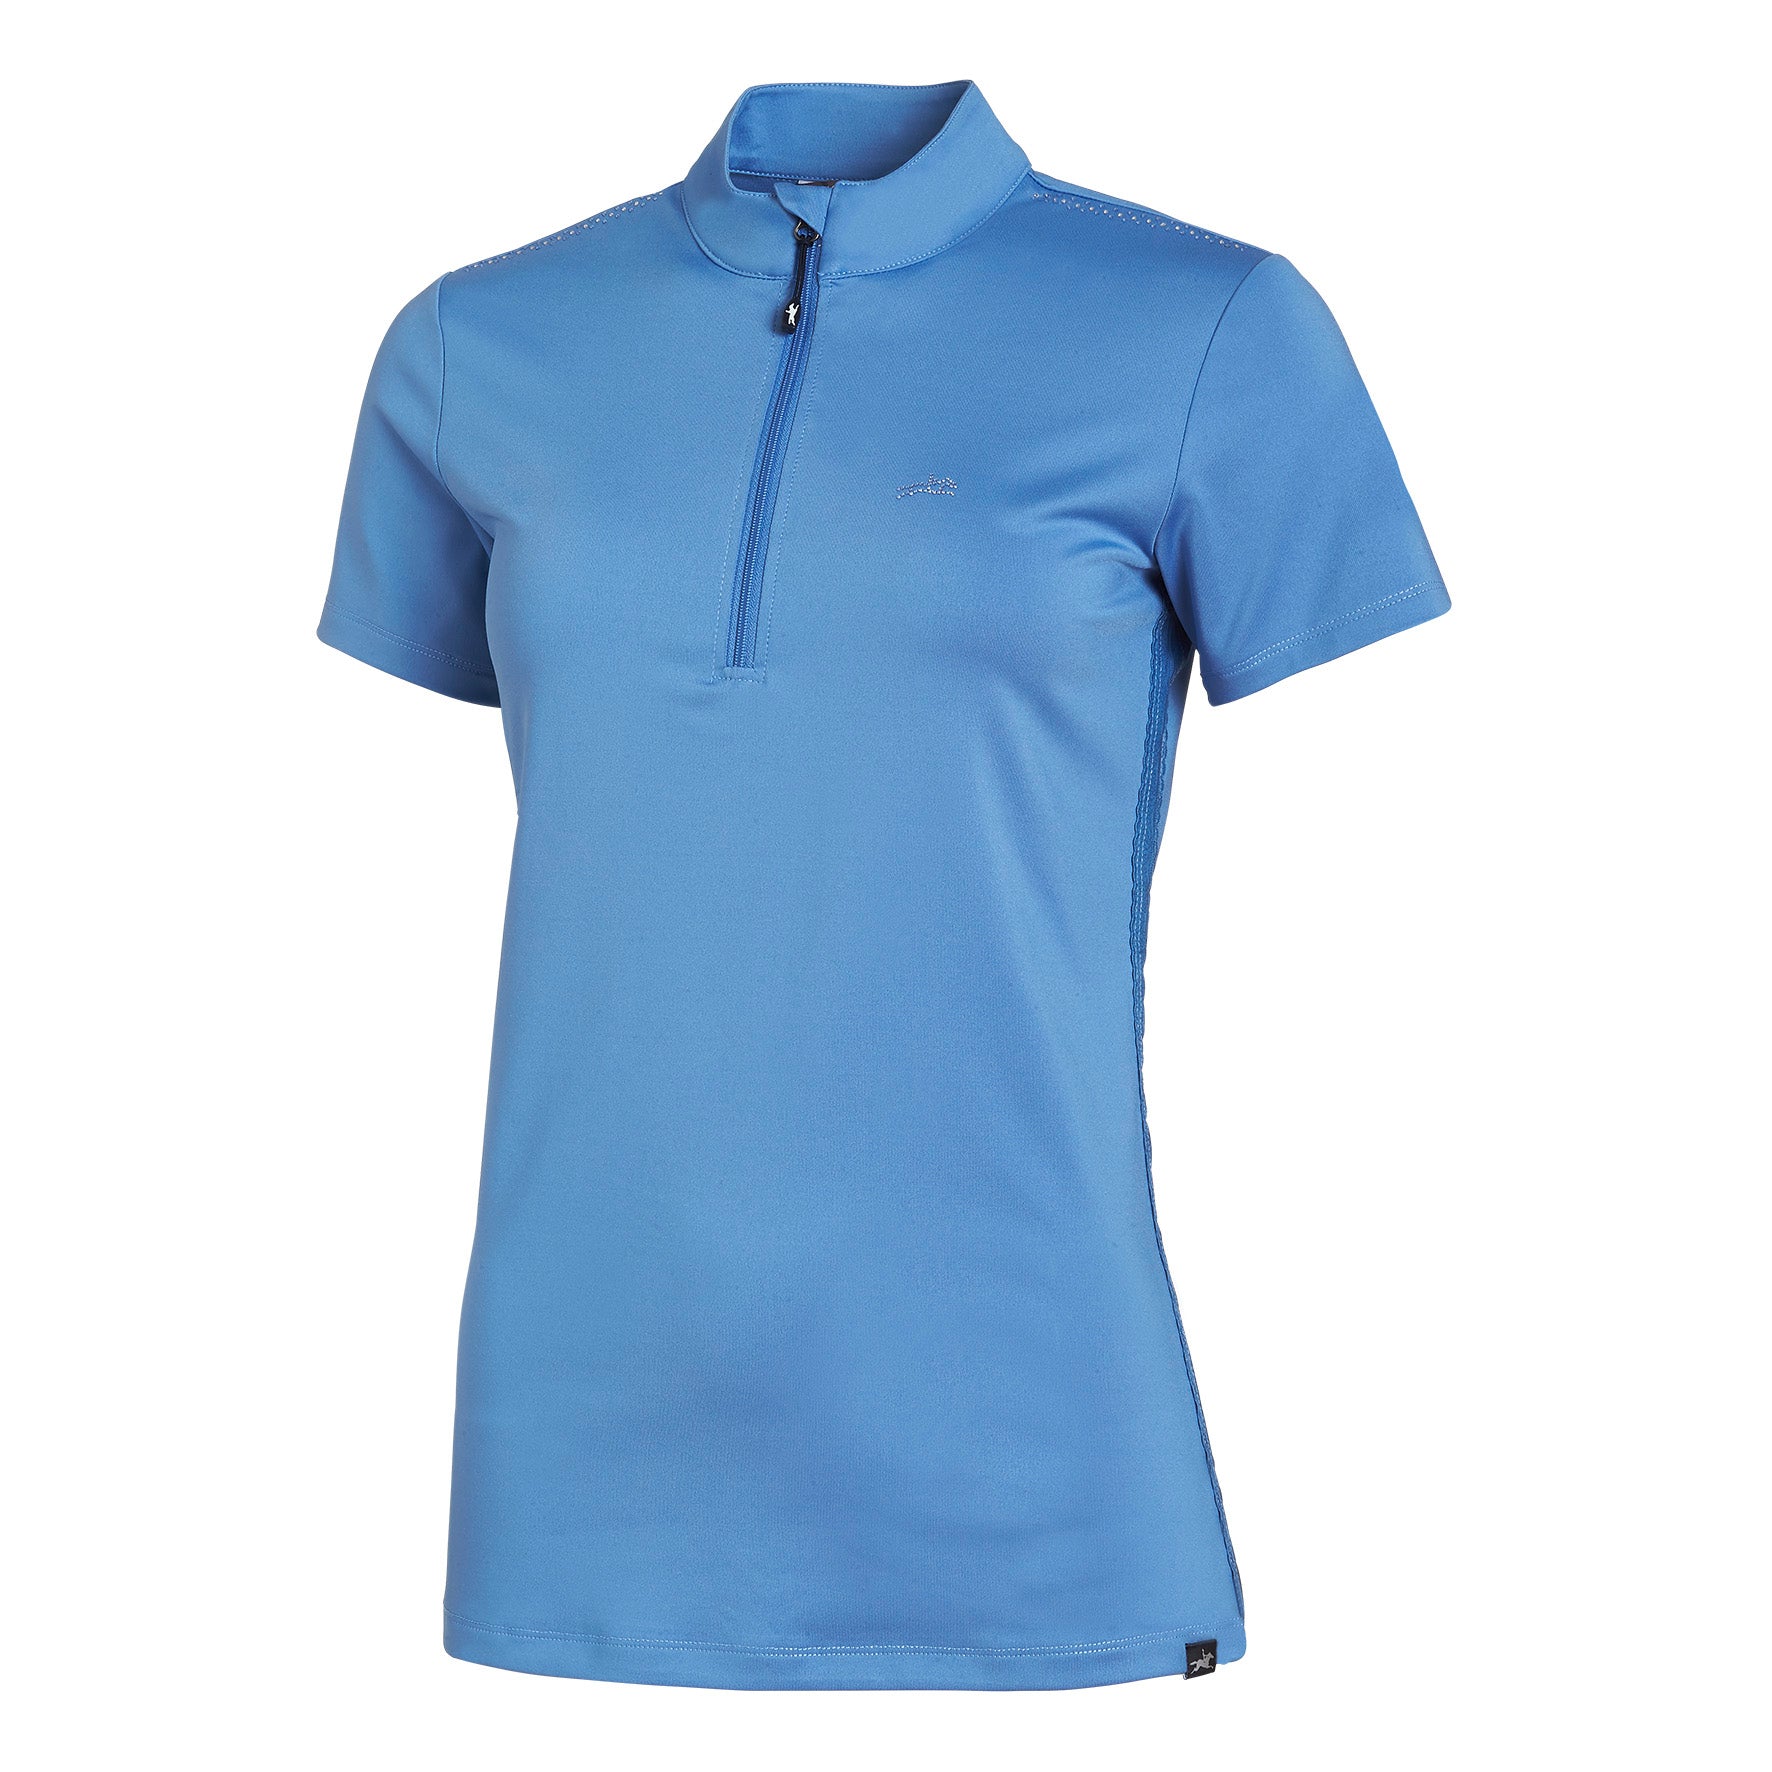 Schockemohle Page Style Ladies Functional Shirt, Cloud Blue